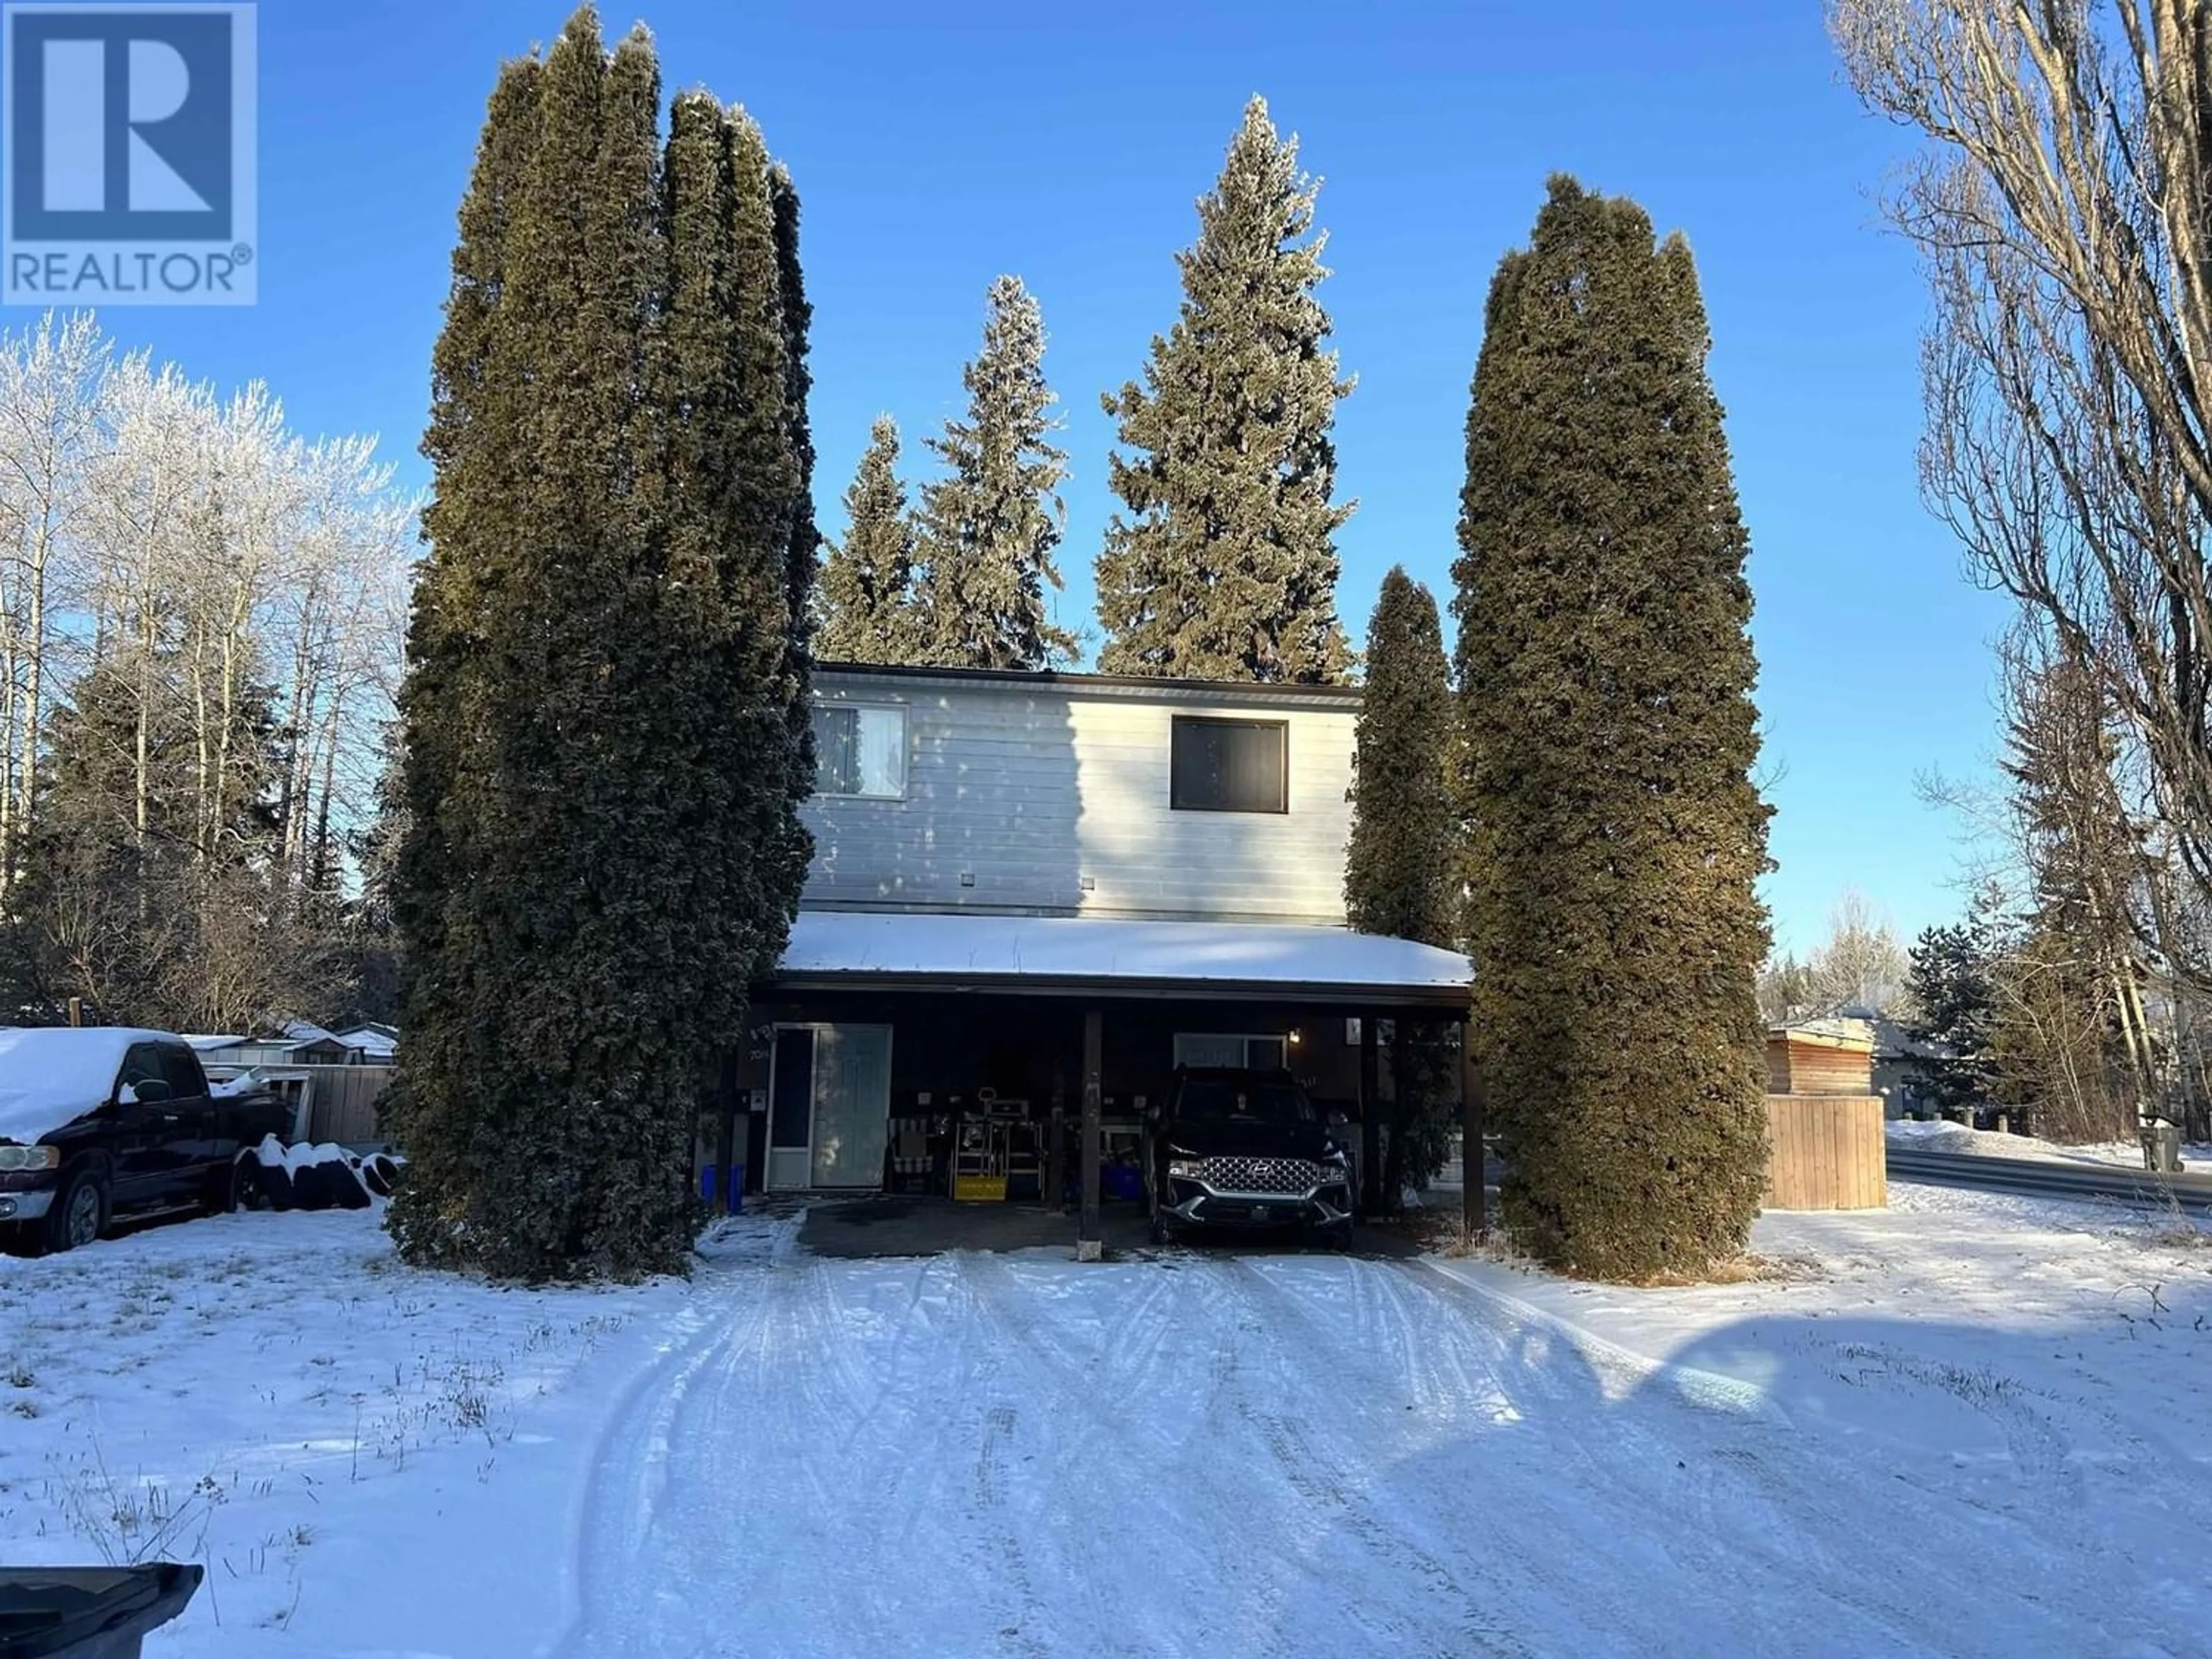 Outside view for 7015 GUELPH CRESCENT, Prince George British Columbia V2N3N9